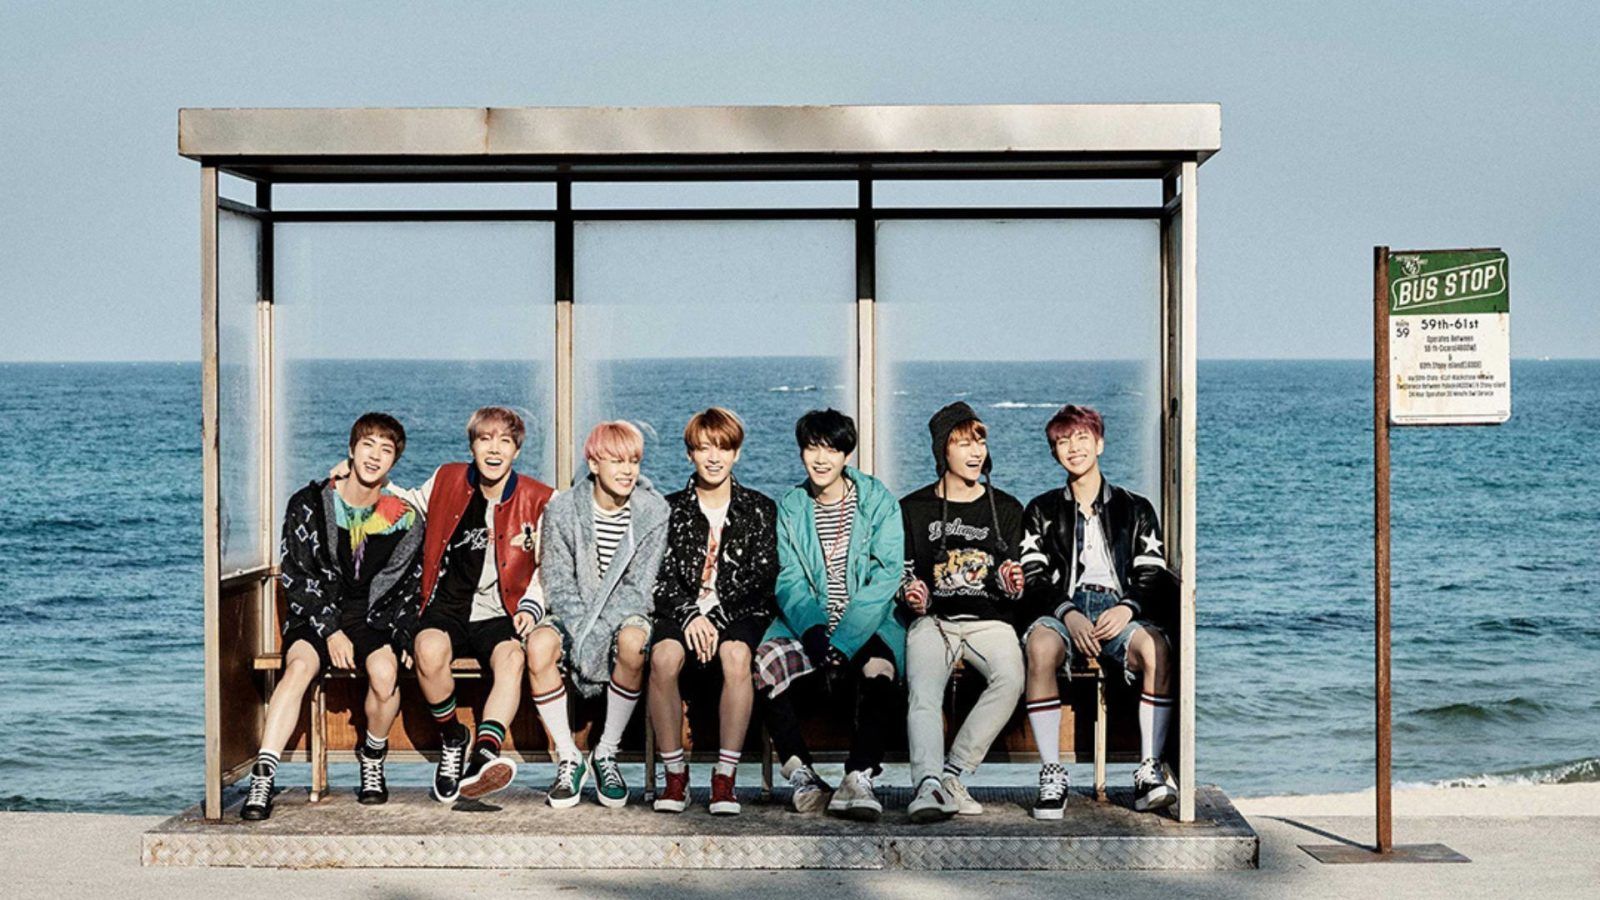 10 Bts Locations In South Korea That Every Army Must Visit